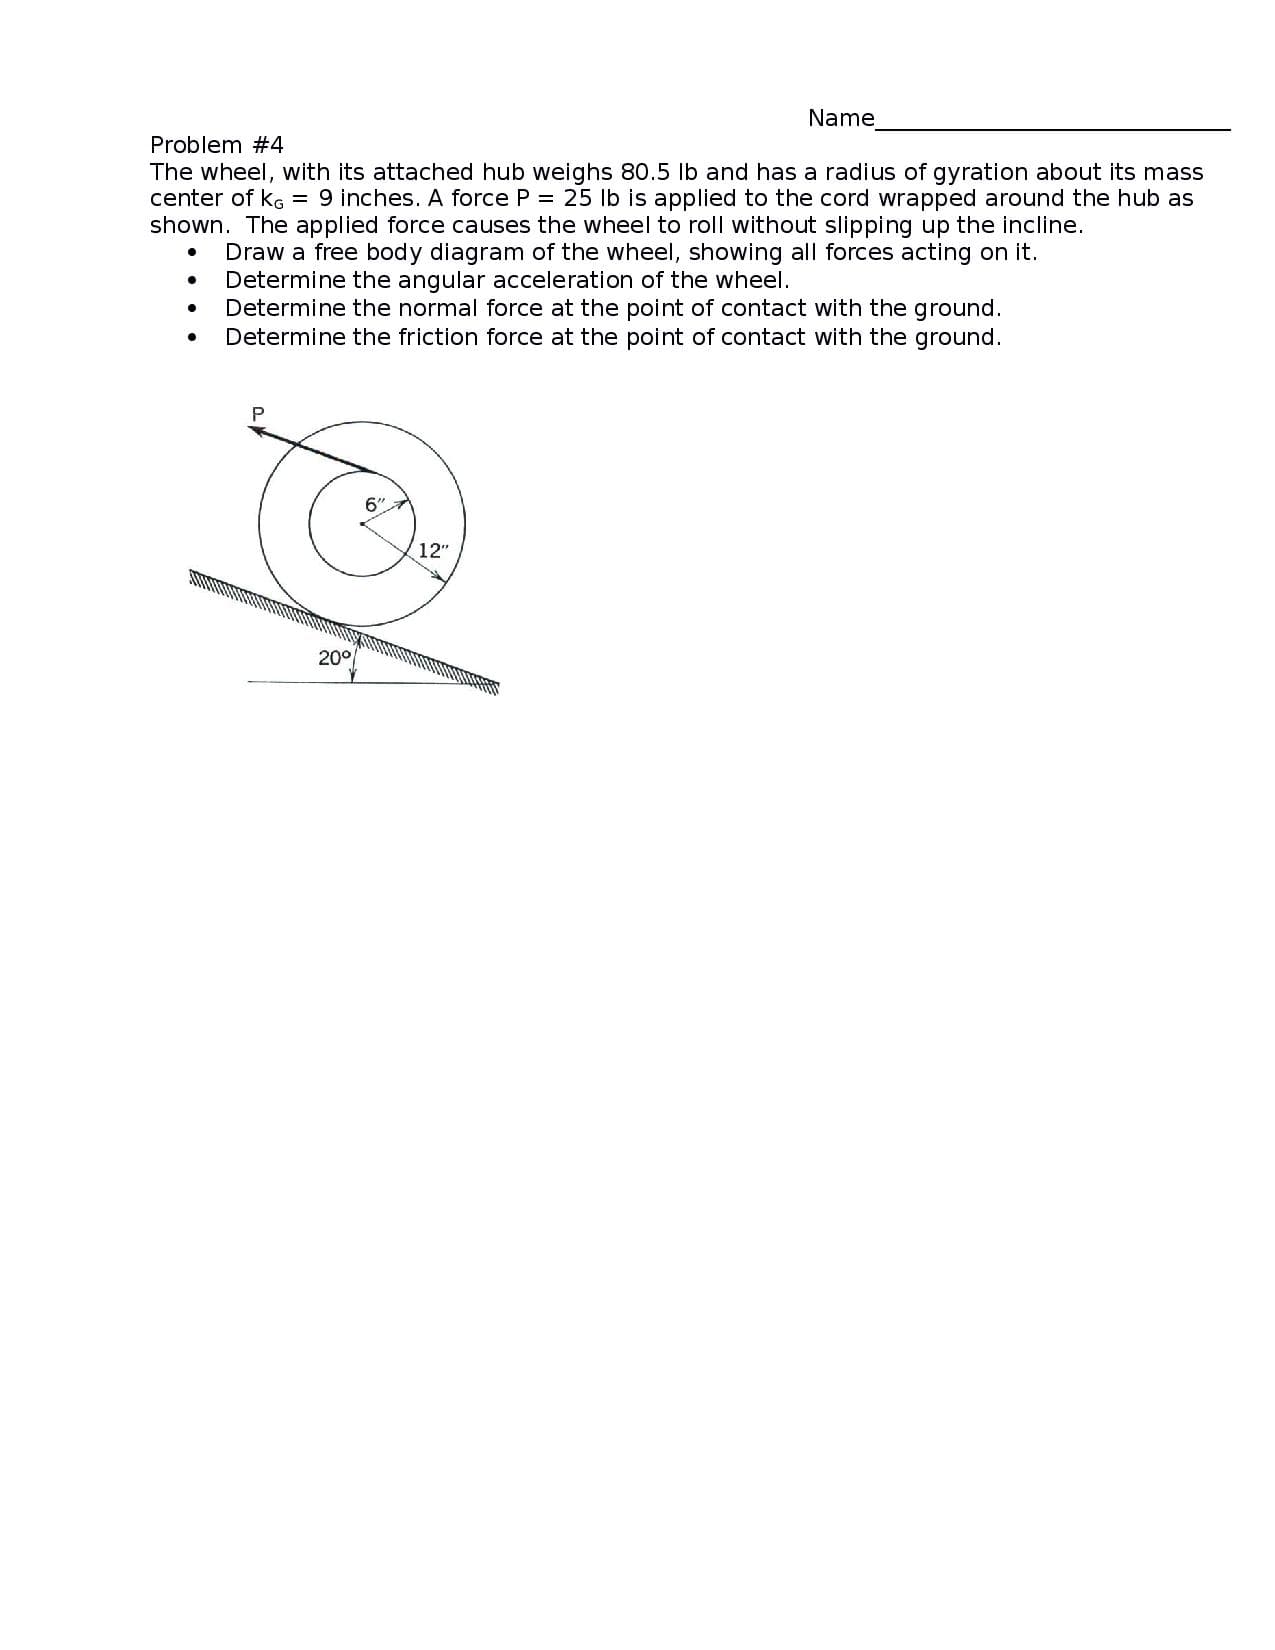 Name
Problem #4
The wheel, with its attached hub weighs 80.5 lb and has a radius of gyration about its mass
center of kg = 9 inches. A force P = 25 lb is applied to the cord wrapped around the hub as
shown. The applied force causes the wheel to roll without slipping up the incline.
Draw a free body diagram of the wheel, showing all forces acting on it.
Determine the angular acceleration of the wheel.
Determine the normal force at the point of contact with the ground.
Determine the friction force at the point of contact with the ground.
6"
12"
20°
